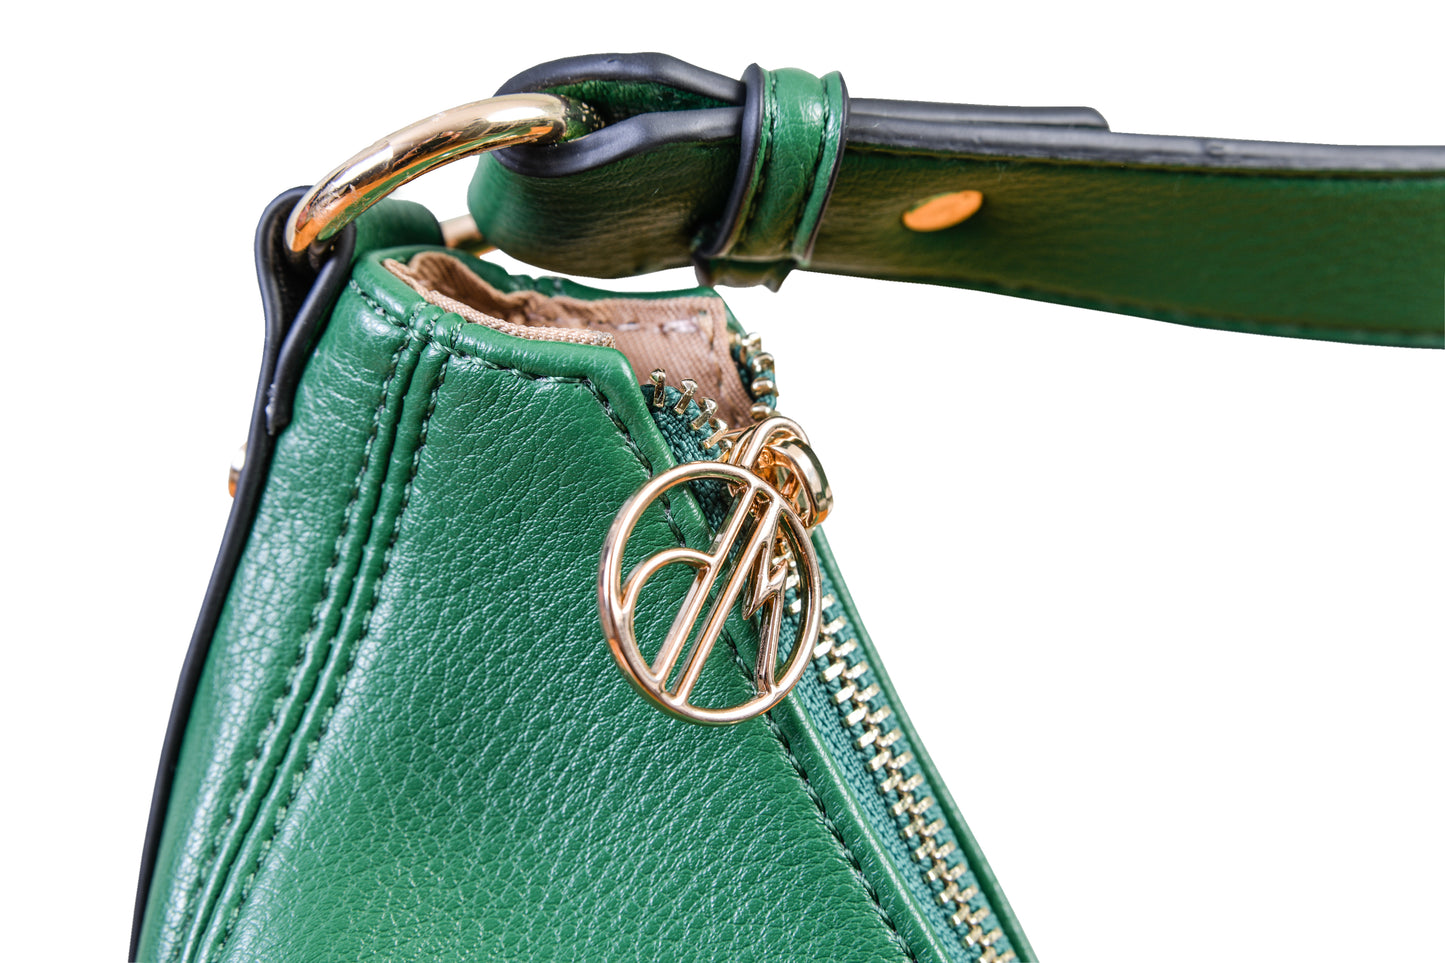 Luna Green Crescent Pebble Grain Faux Leather Handbag made by Dewi Maya gold zipper pull available at the best boutique in Upstate South Carolina Spartanburg Greenville Dewi Maya Boutique